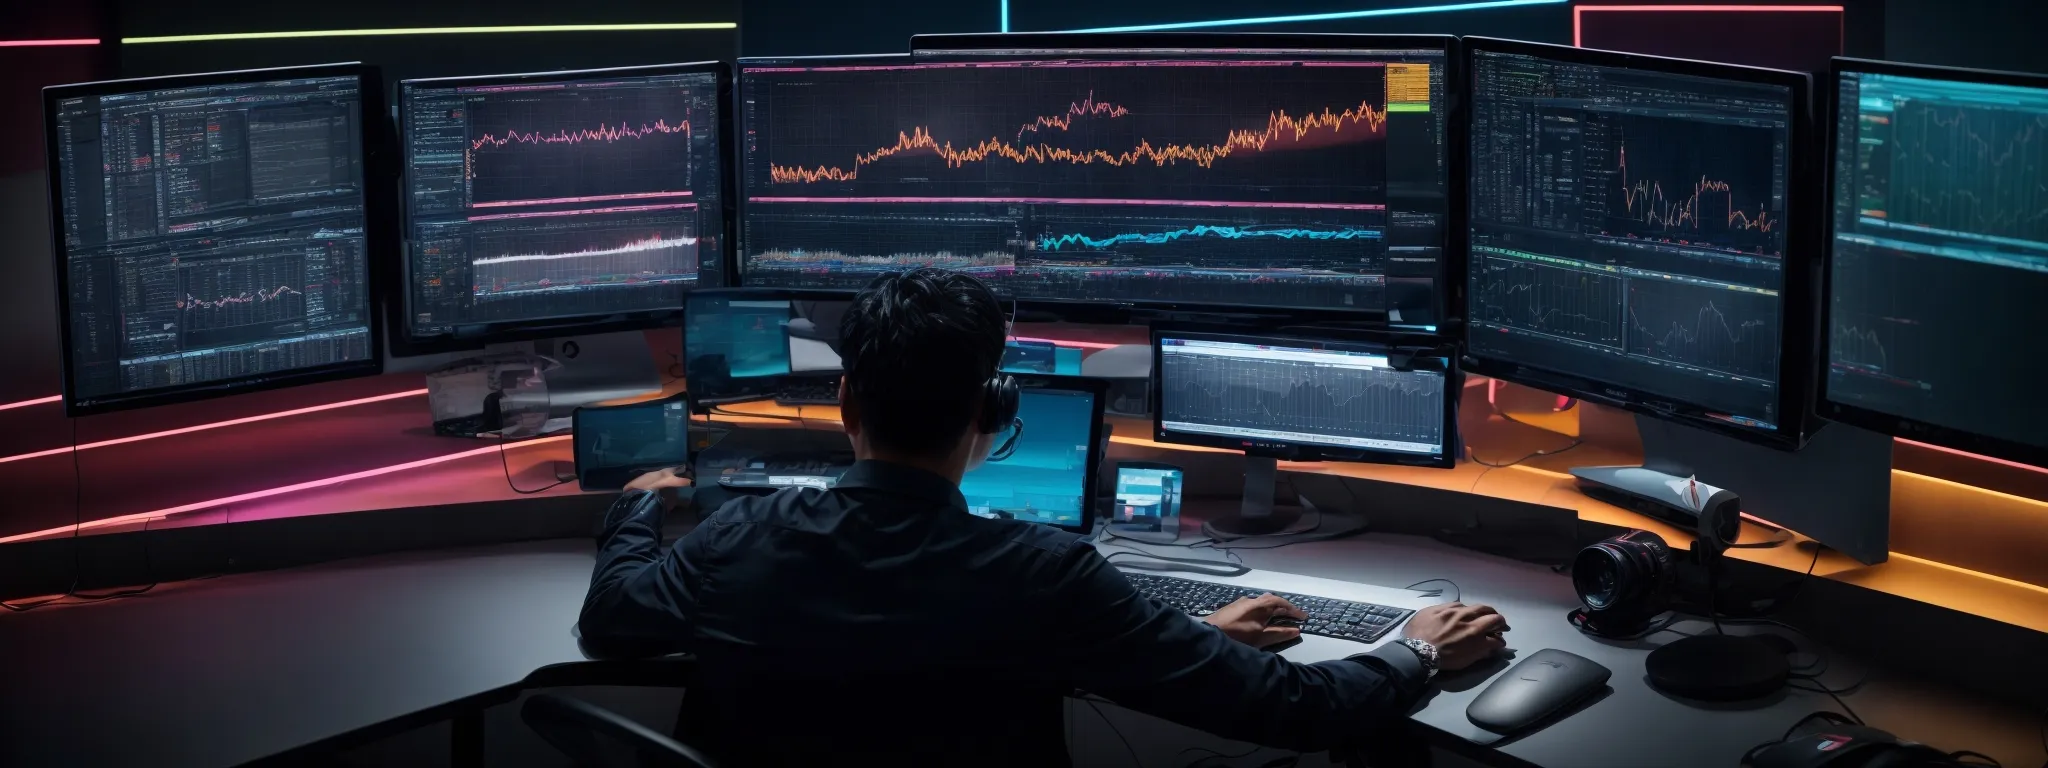 a marketer working intently at a spacious desk with dual monitors displaying colorful graphs and a video editing software interface.